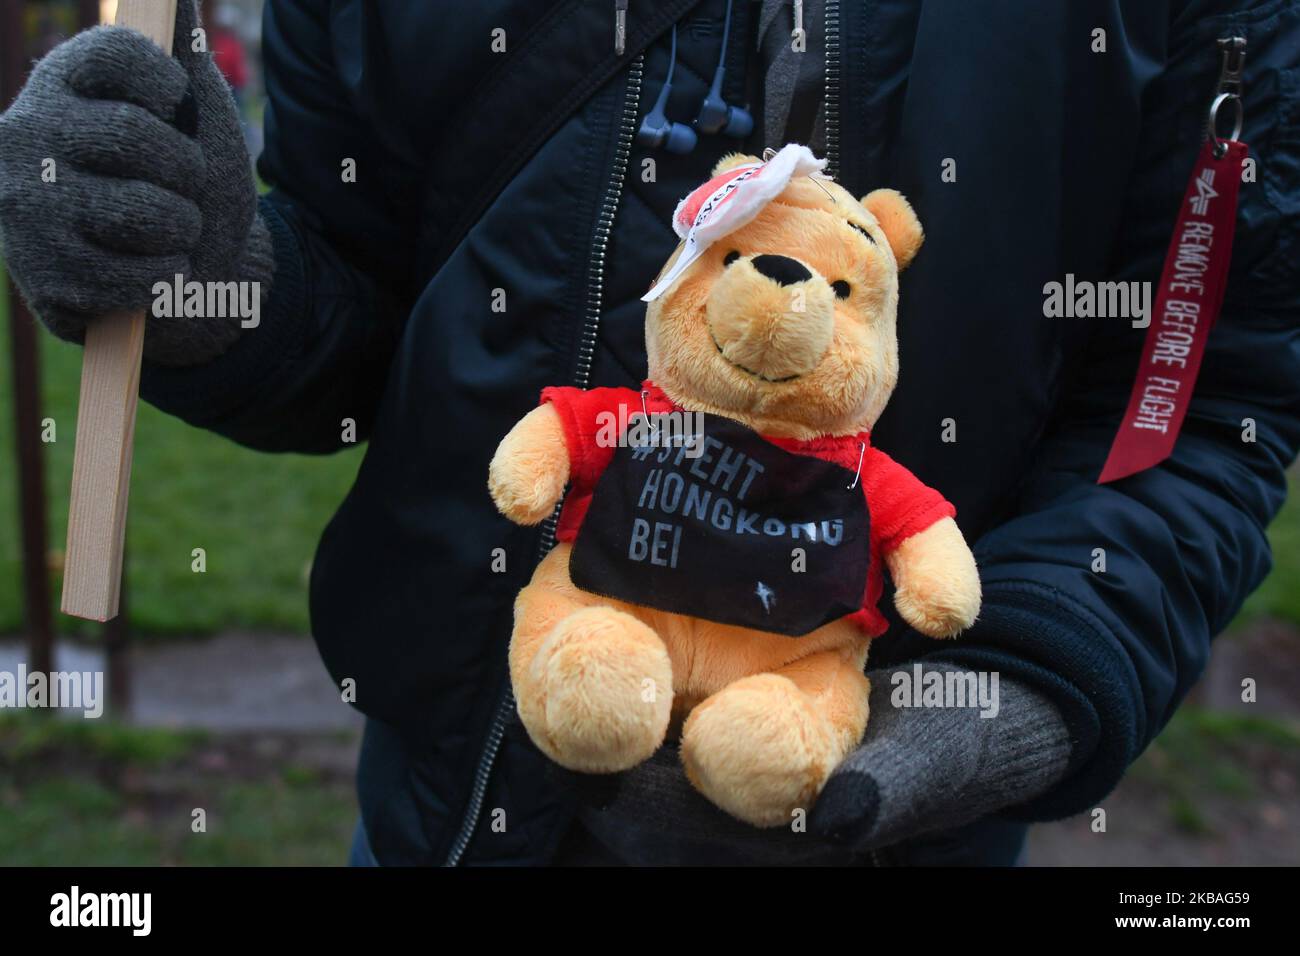 An activist holds a Winnie-the-Pooh teddy bear during a protest in support of pro-democracy demonstrations in Hong Kong at a spot where the Berlin Wall once stood at Bernauer Strasse on the 30th anniversary of the fall of the Berlin Wall. Chinese internet users have joked that Chinese President Xi Jinping resembles the talking bear, leading the country's censors to scrub online references to the character. On Saturday, November 9, 2019, in Berlin, Germany. (Photo by Artur Widak/NurPhoto) Stock Photo